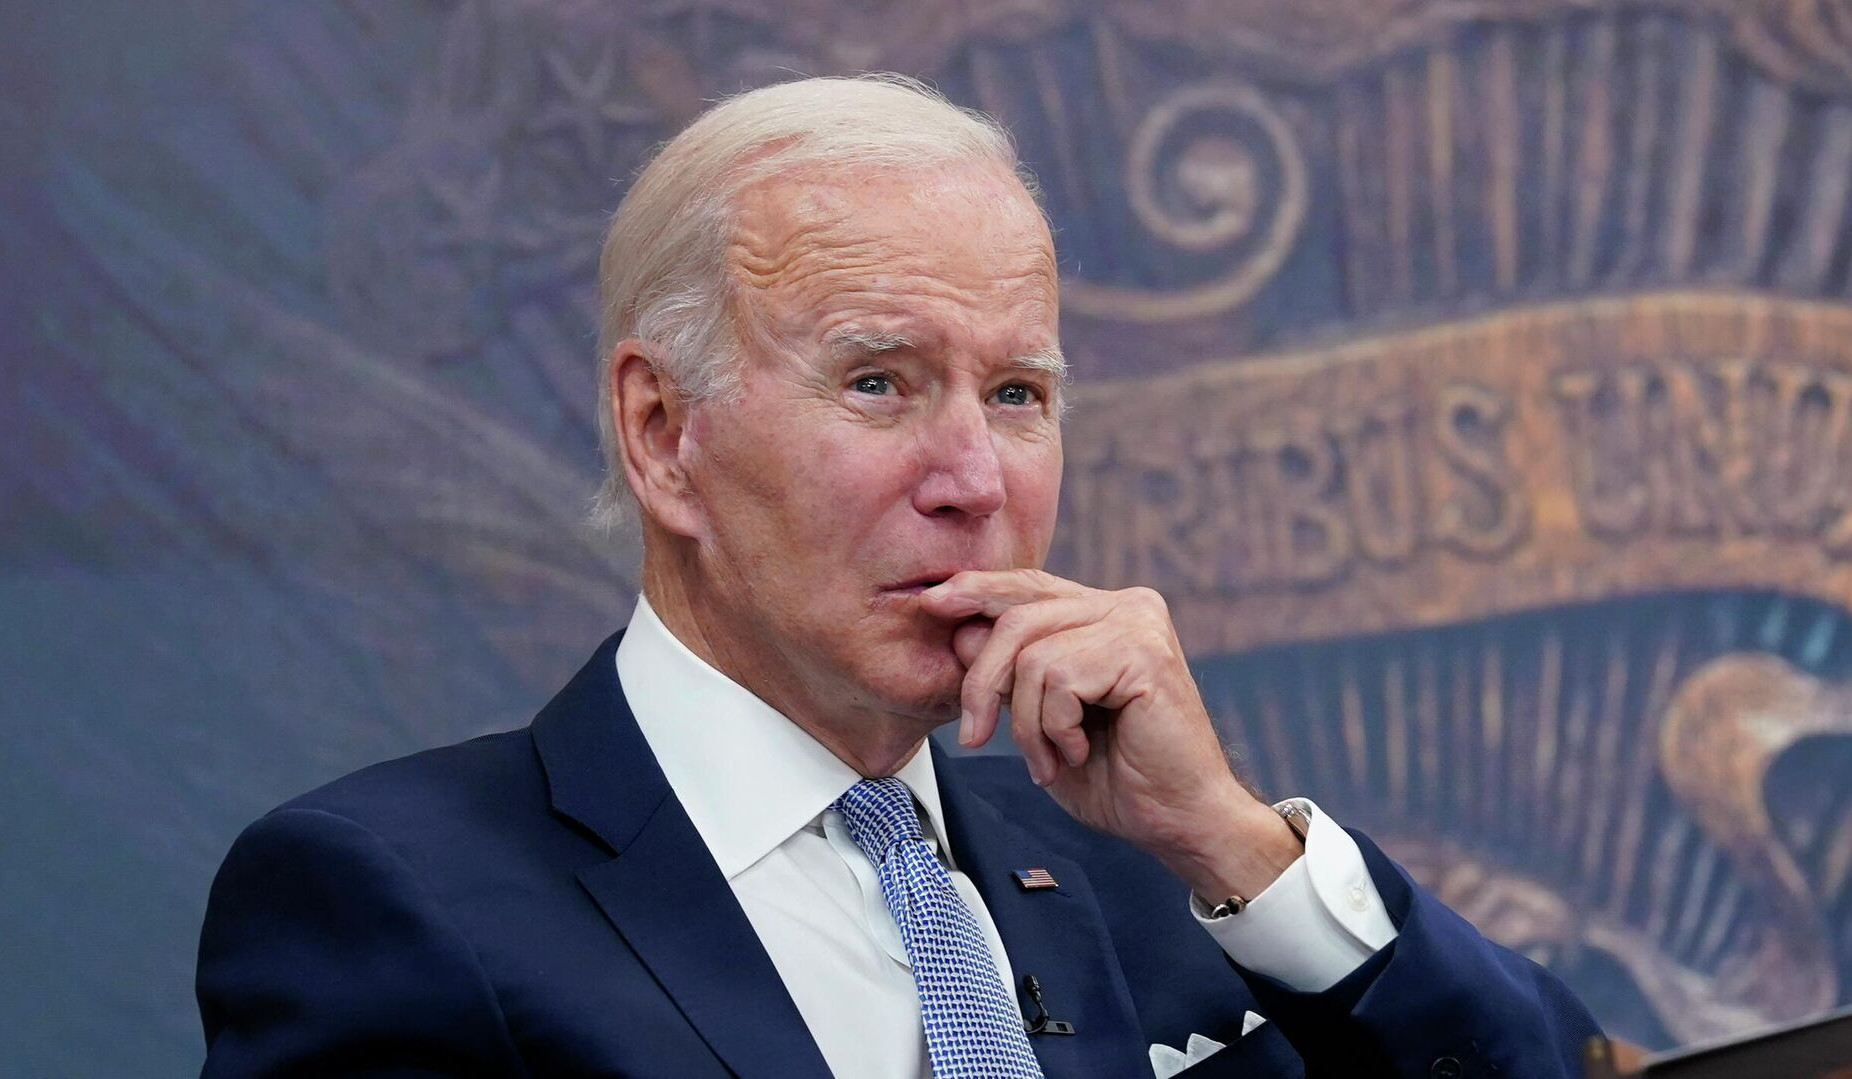 Israel agrees to Ramadan ceasefire to get hostages back, Biden